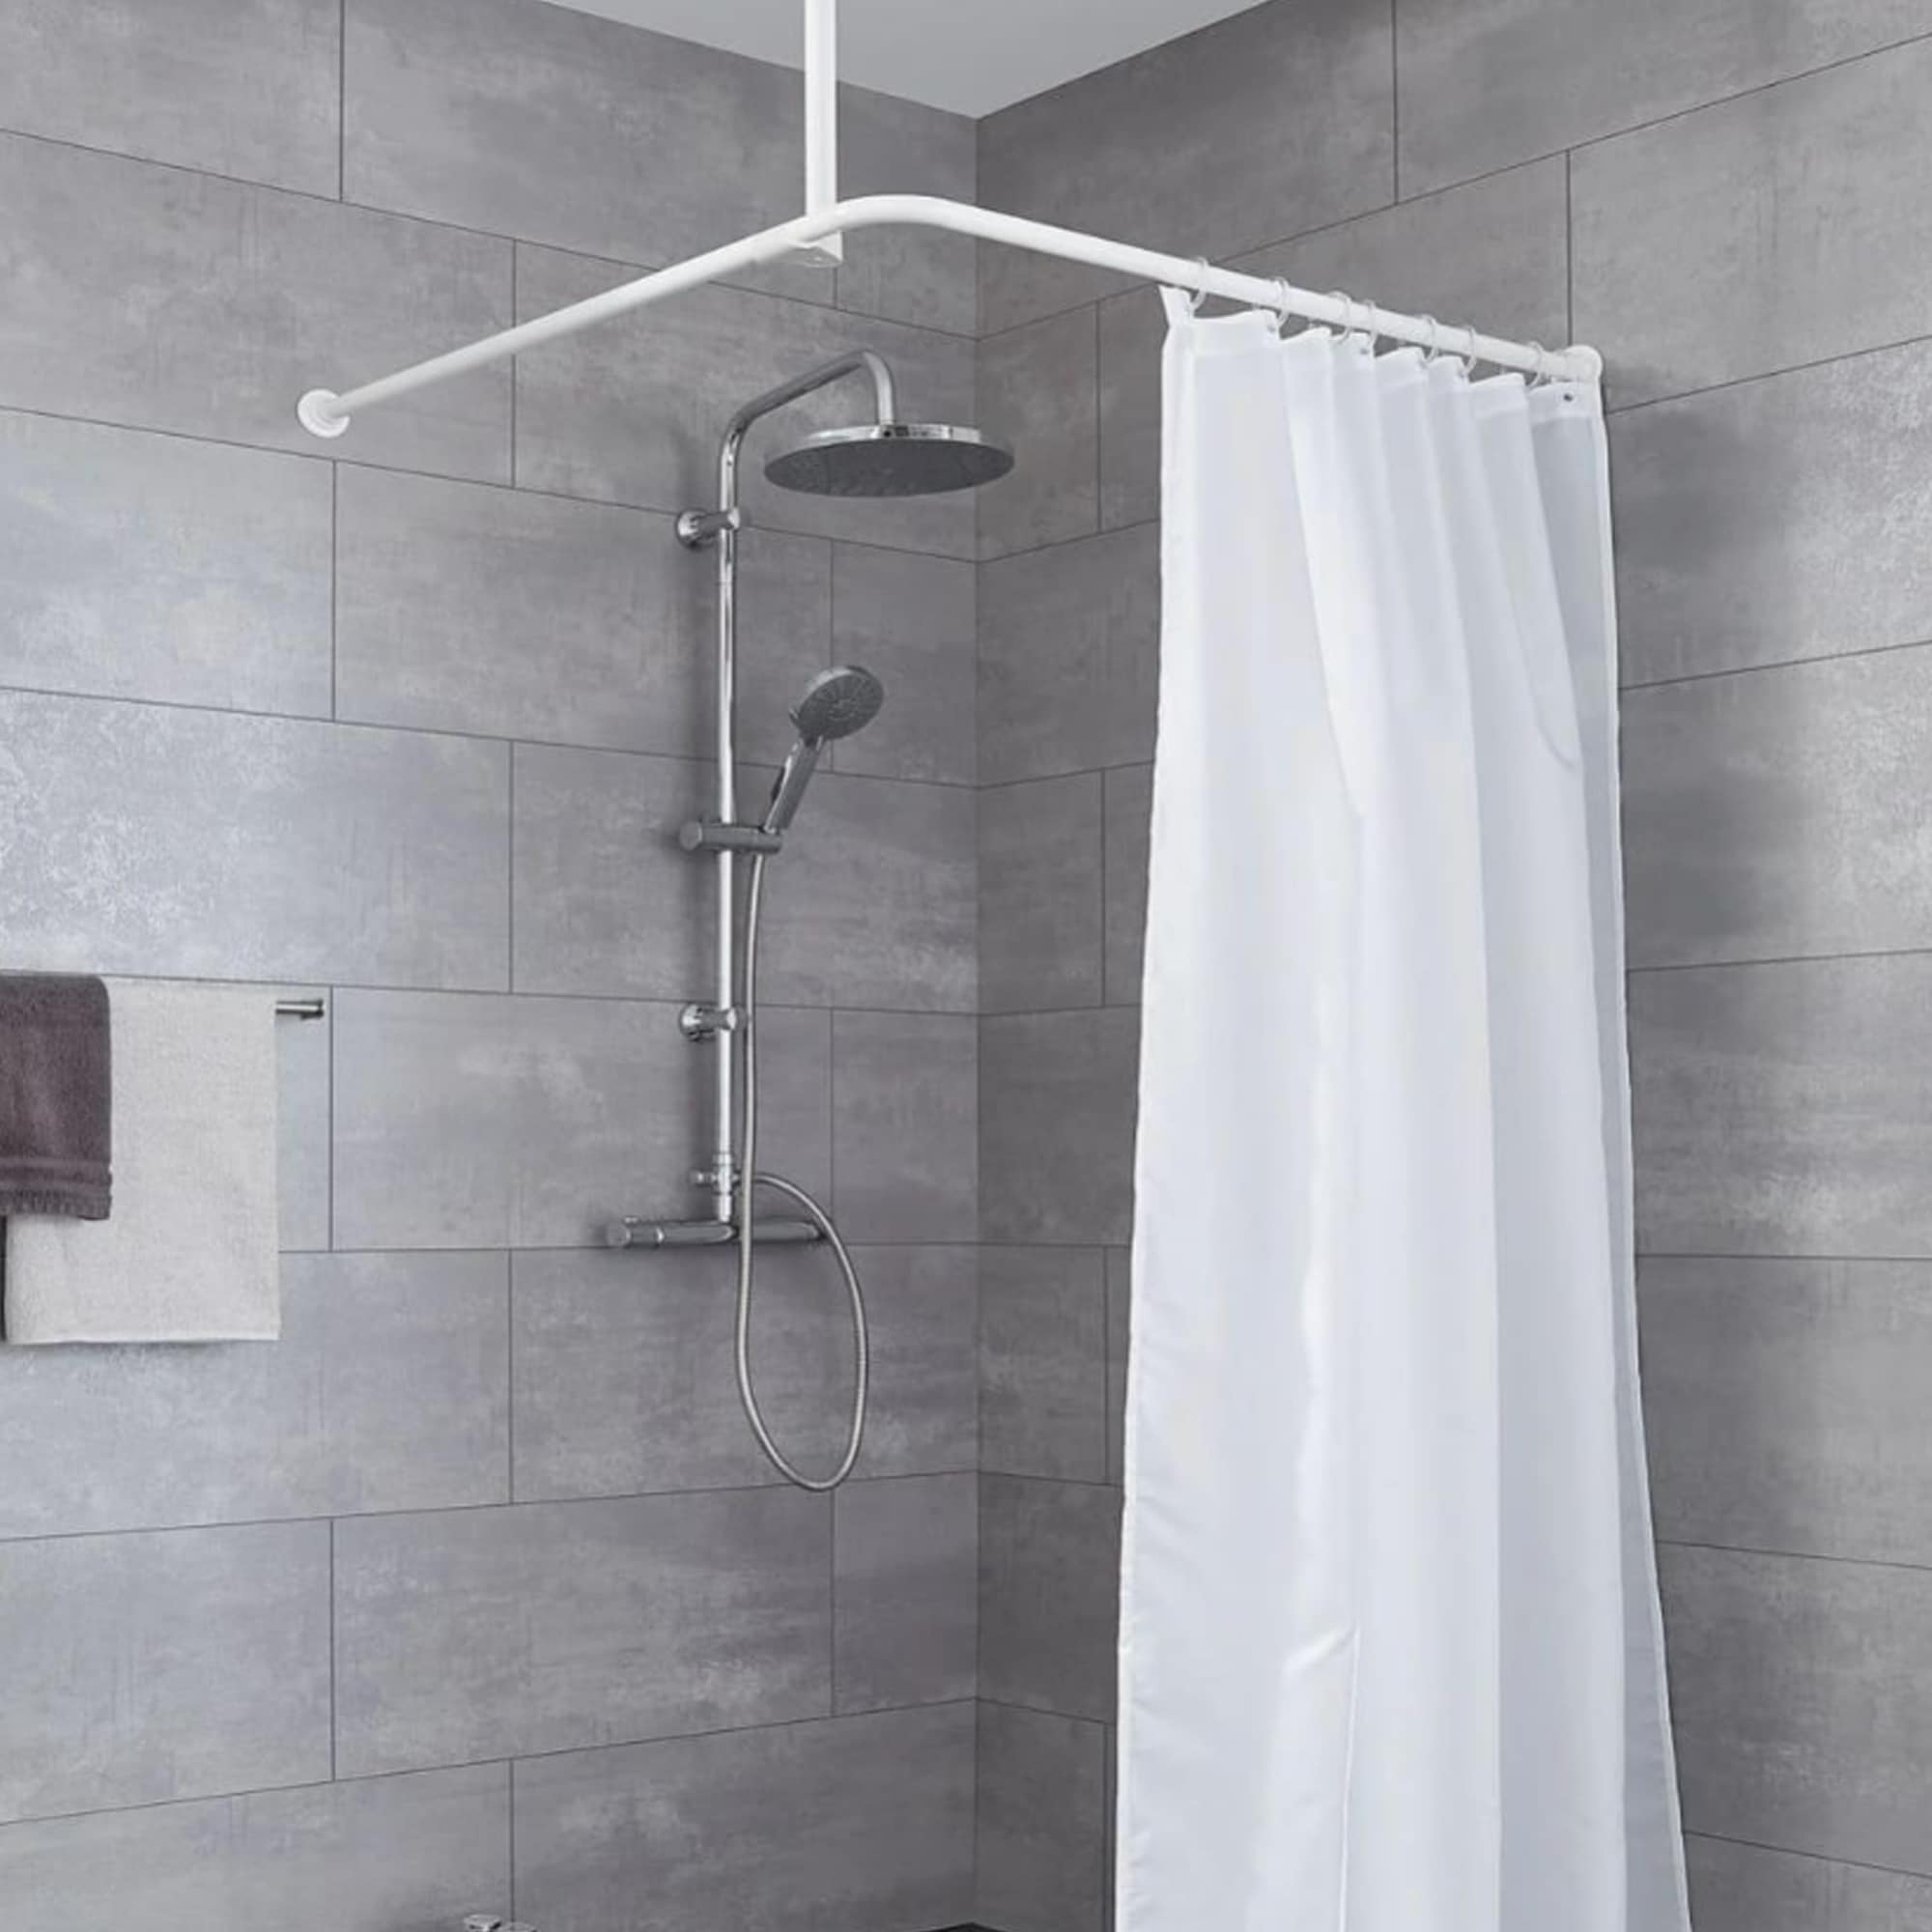 White ceiling support rod installed in a gray tiled bathroom with a white shower curtain